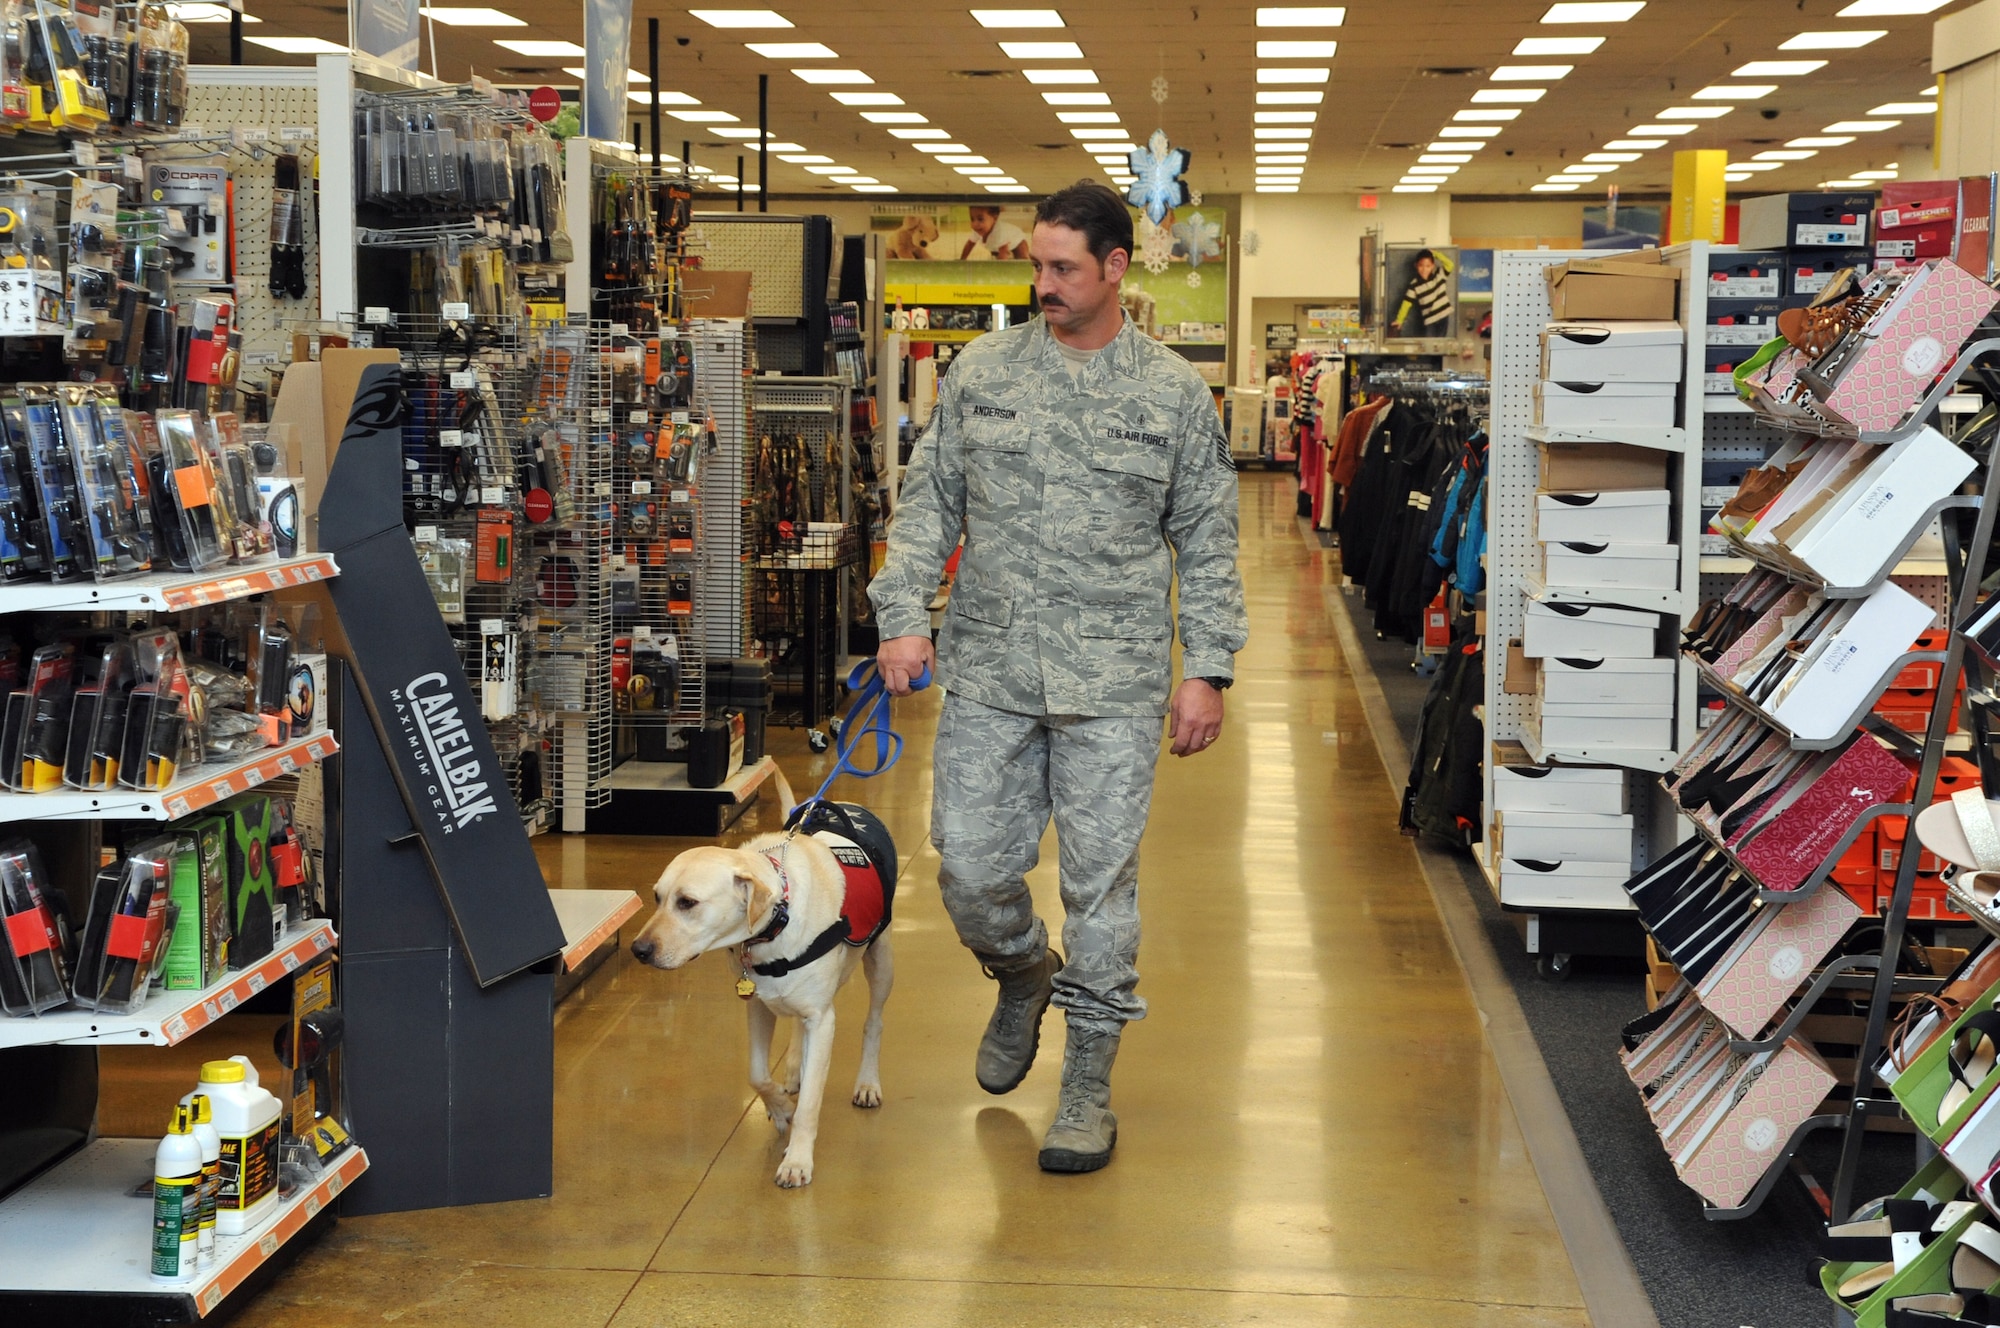 Tech. Sgt. Cory Anderson, 319th Medical Operations Squadron aerospace medical service technician, and his dog Zeus, shop in the Exchange on Grand Forks Air Force Base, N.D., November 18, 2014. Zeus is a service dog and has been trained to help Anderson deal with the effects of post-traumatic stress disorder. (U.S. Air Force photo/Staff Sgt. David Dobrydney)